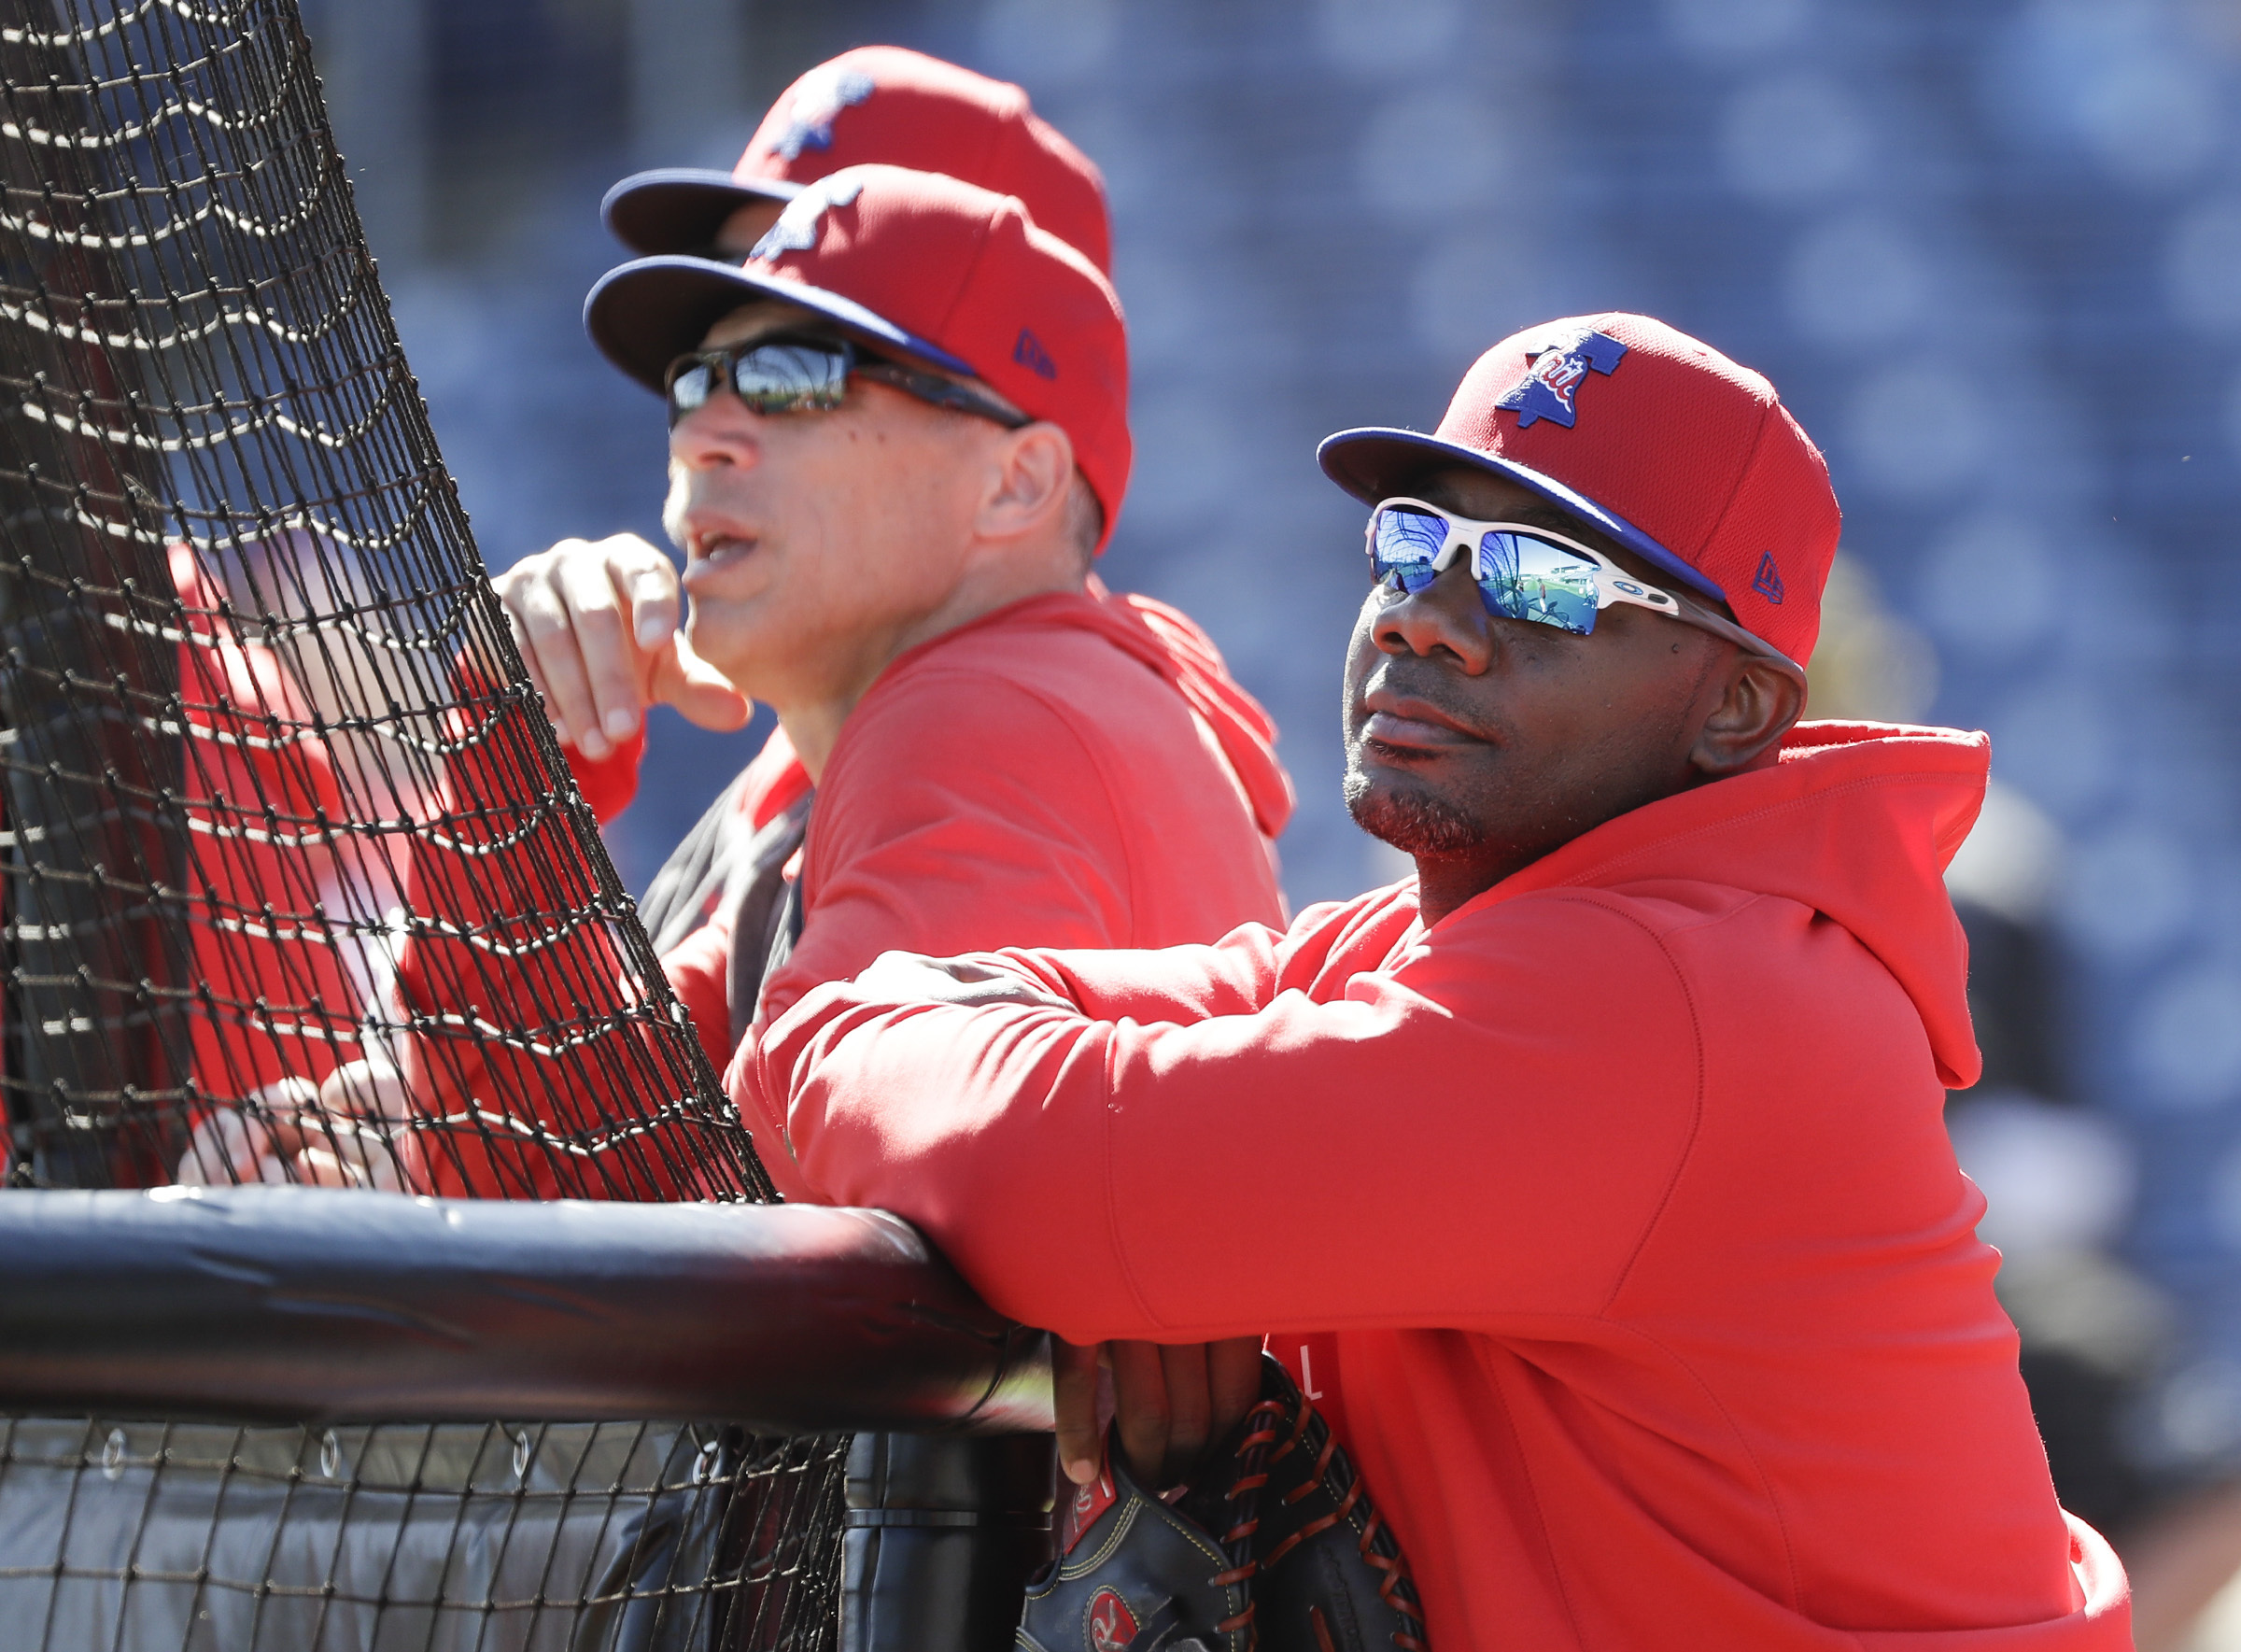 Rockies: Ryan Howard gets another chance, could help in October